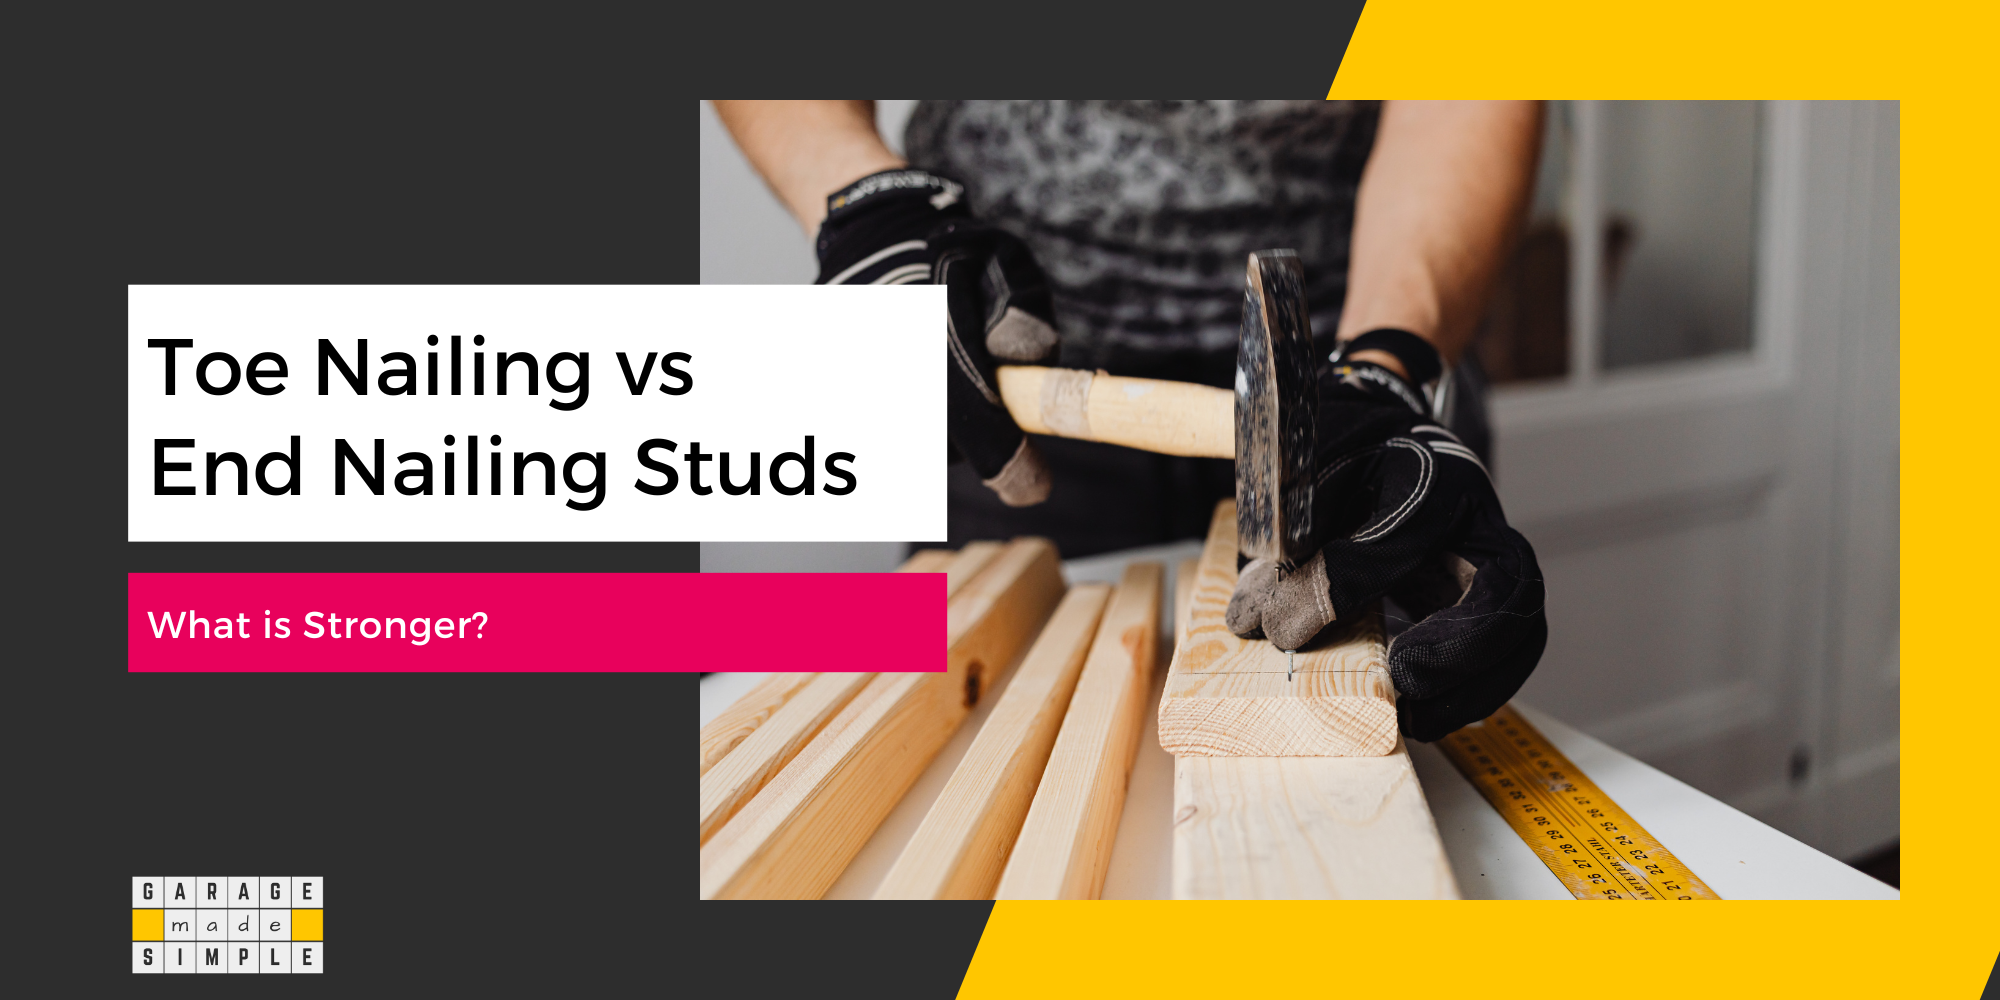 Toe Nailing vs End Nailing Studs: What is Stronger? (Explained!)